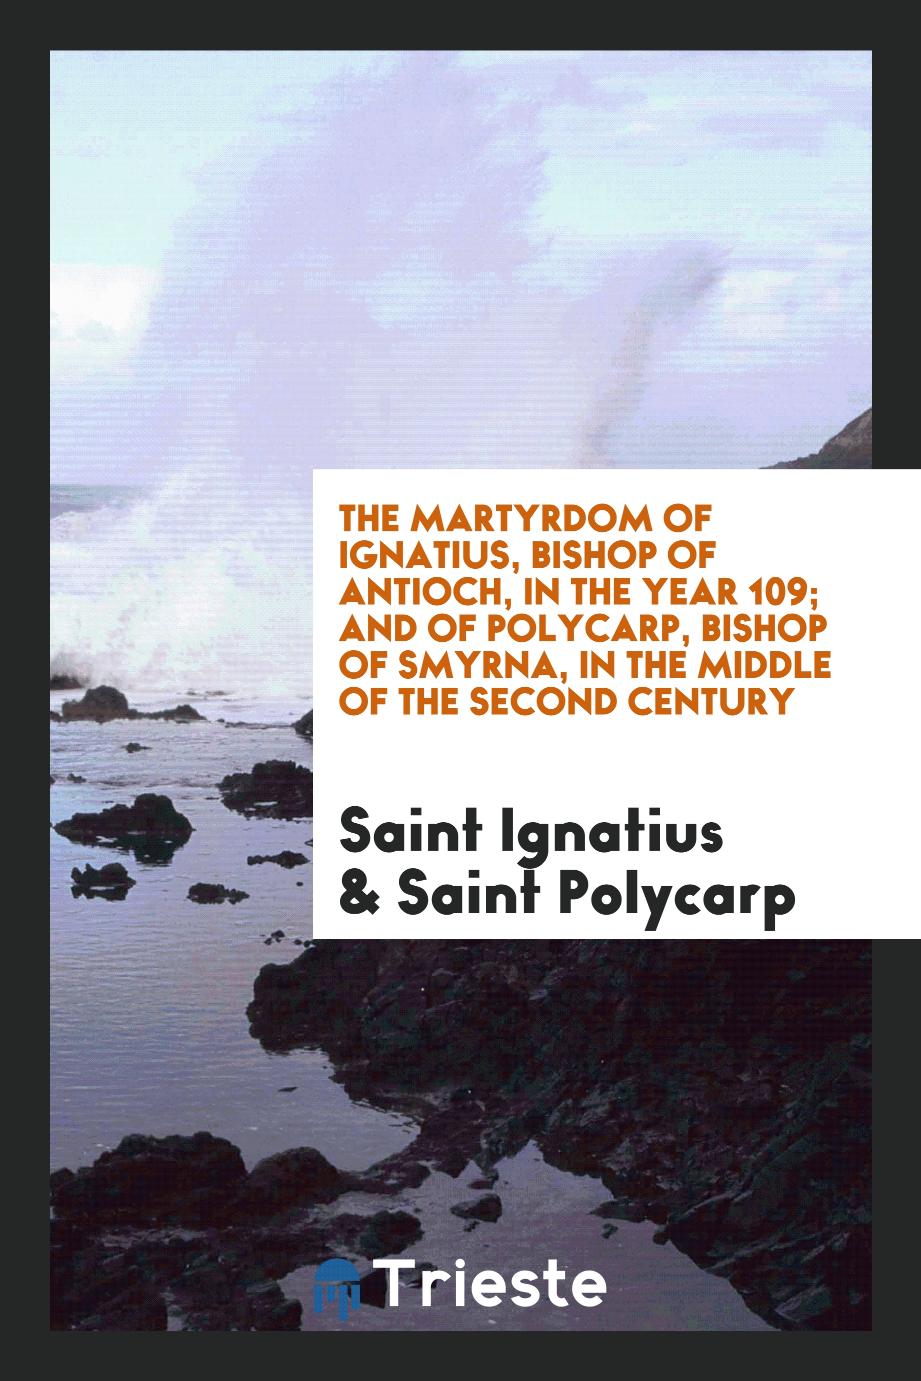 The martyrdom of Ignatius, bishop of Antioch, in the year 109; and of Polycarp, bishop of Smyrna, in the middle of the second century